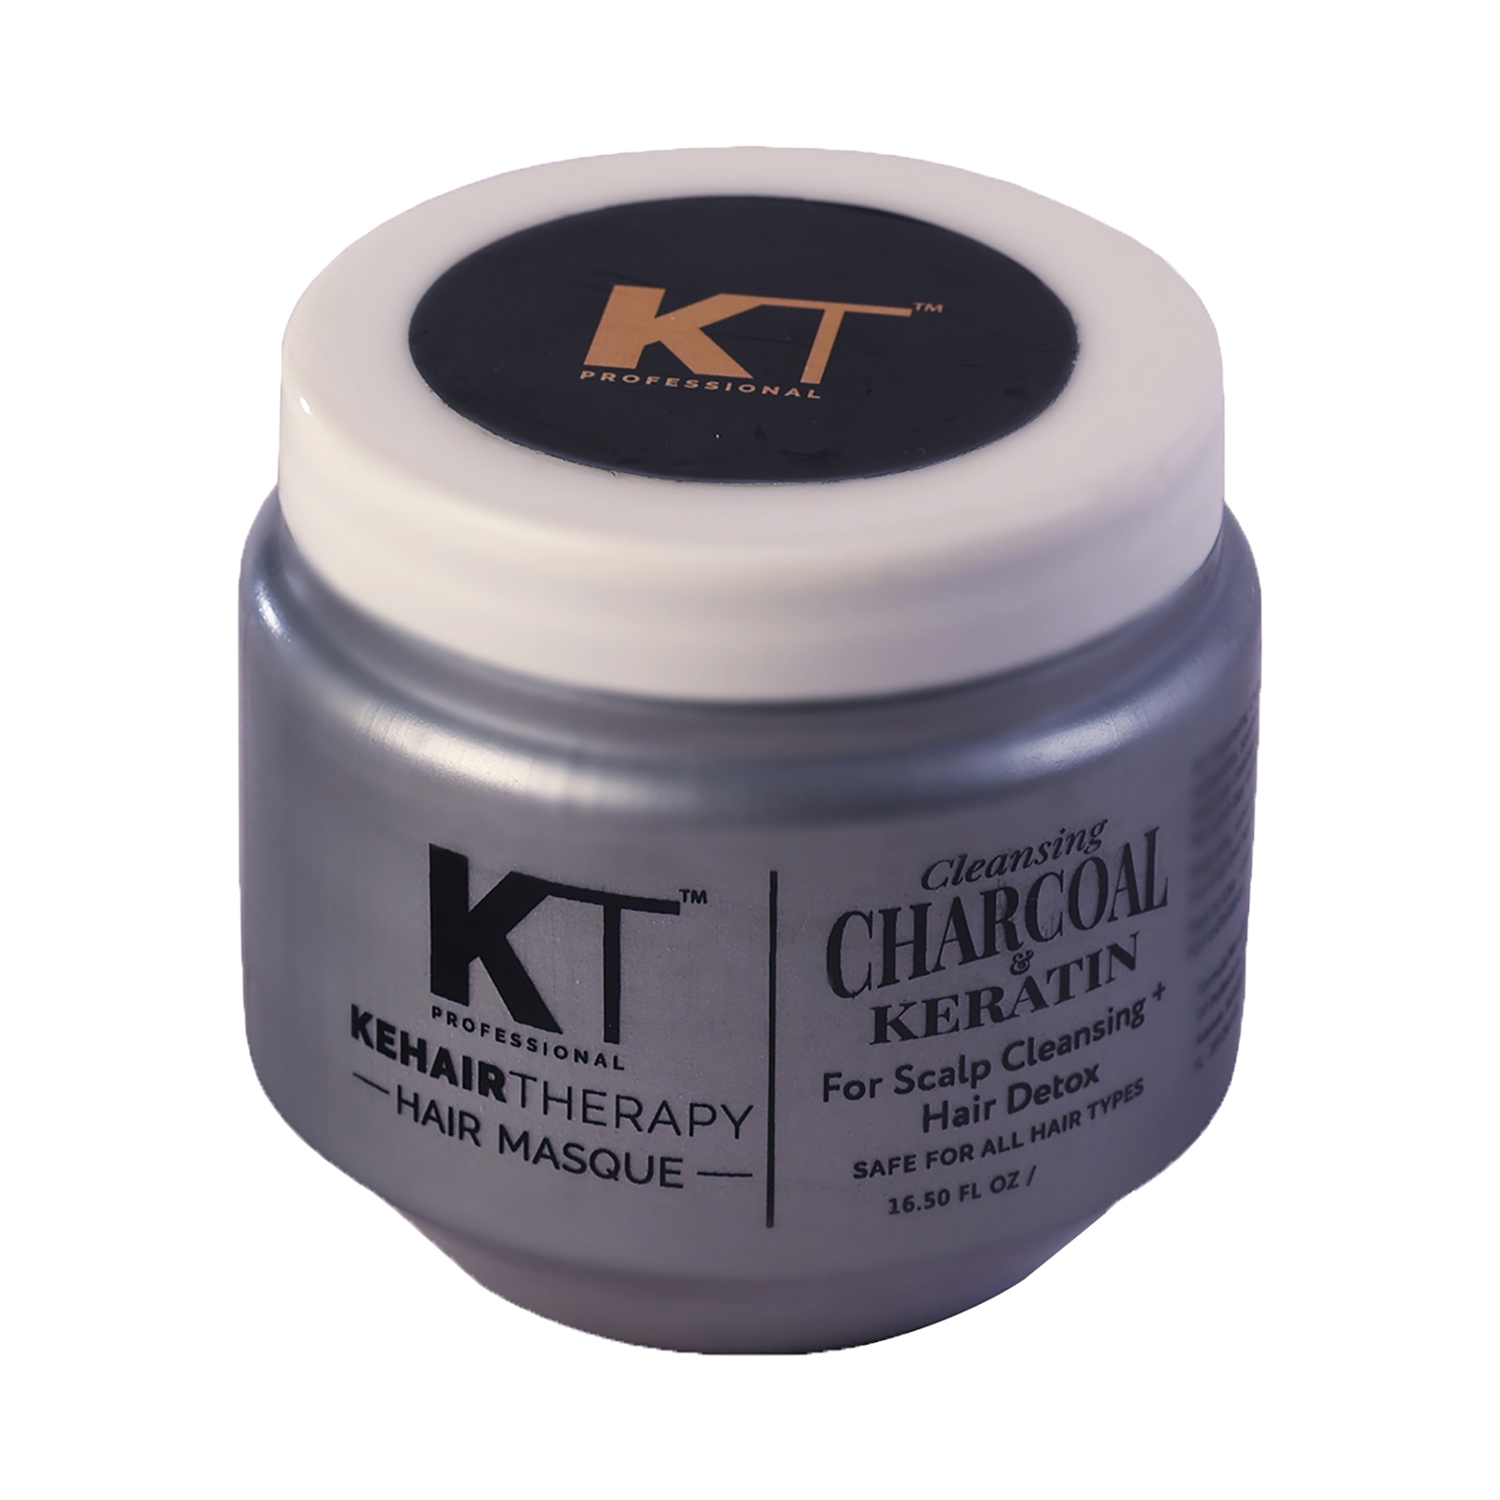 KT Professional Cleansing Charcoal & Keratin Masque (250ml)